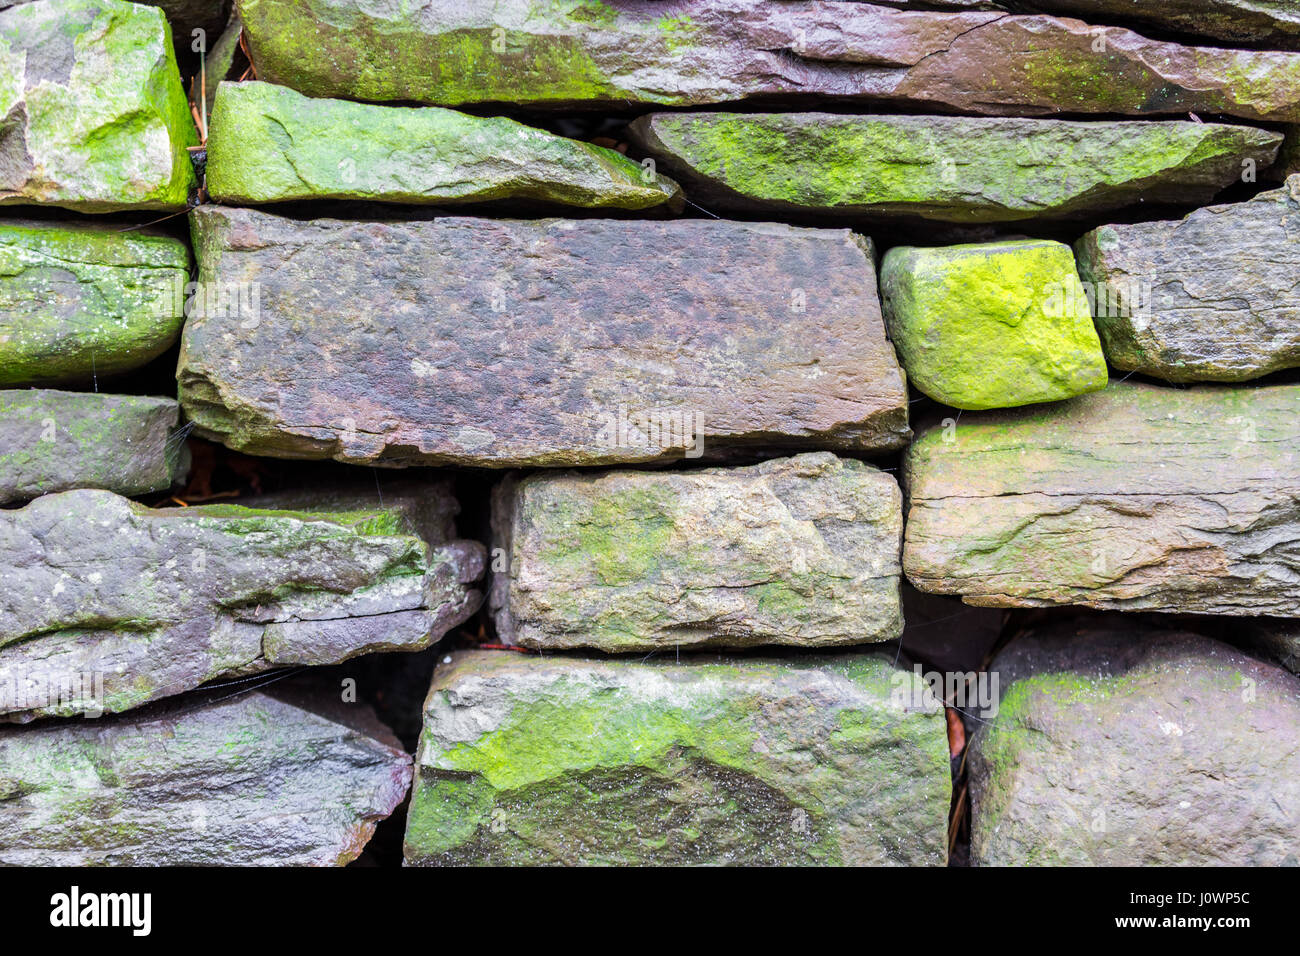 a detail image of numerous weathered stones in a rock wall Stock Photo